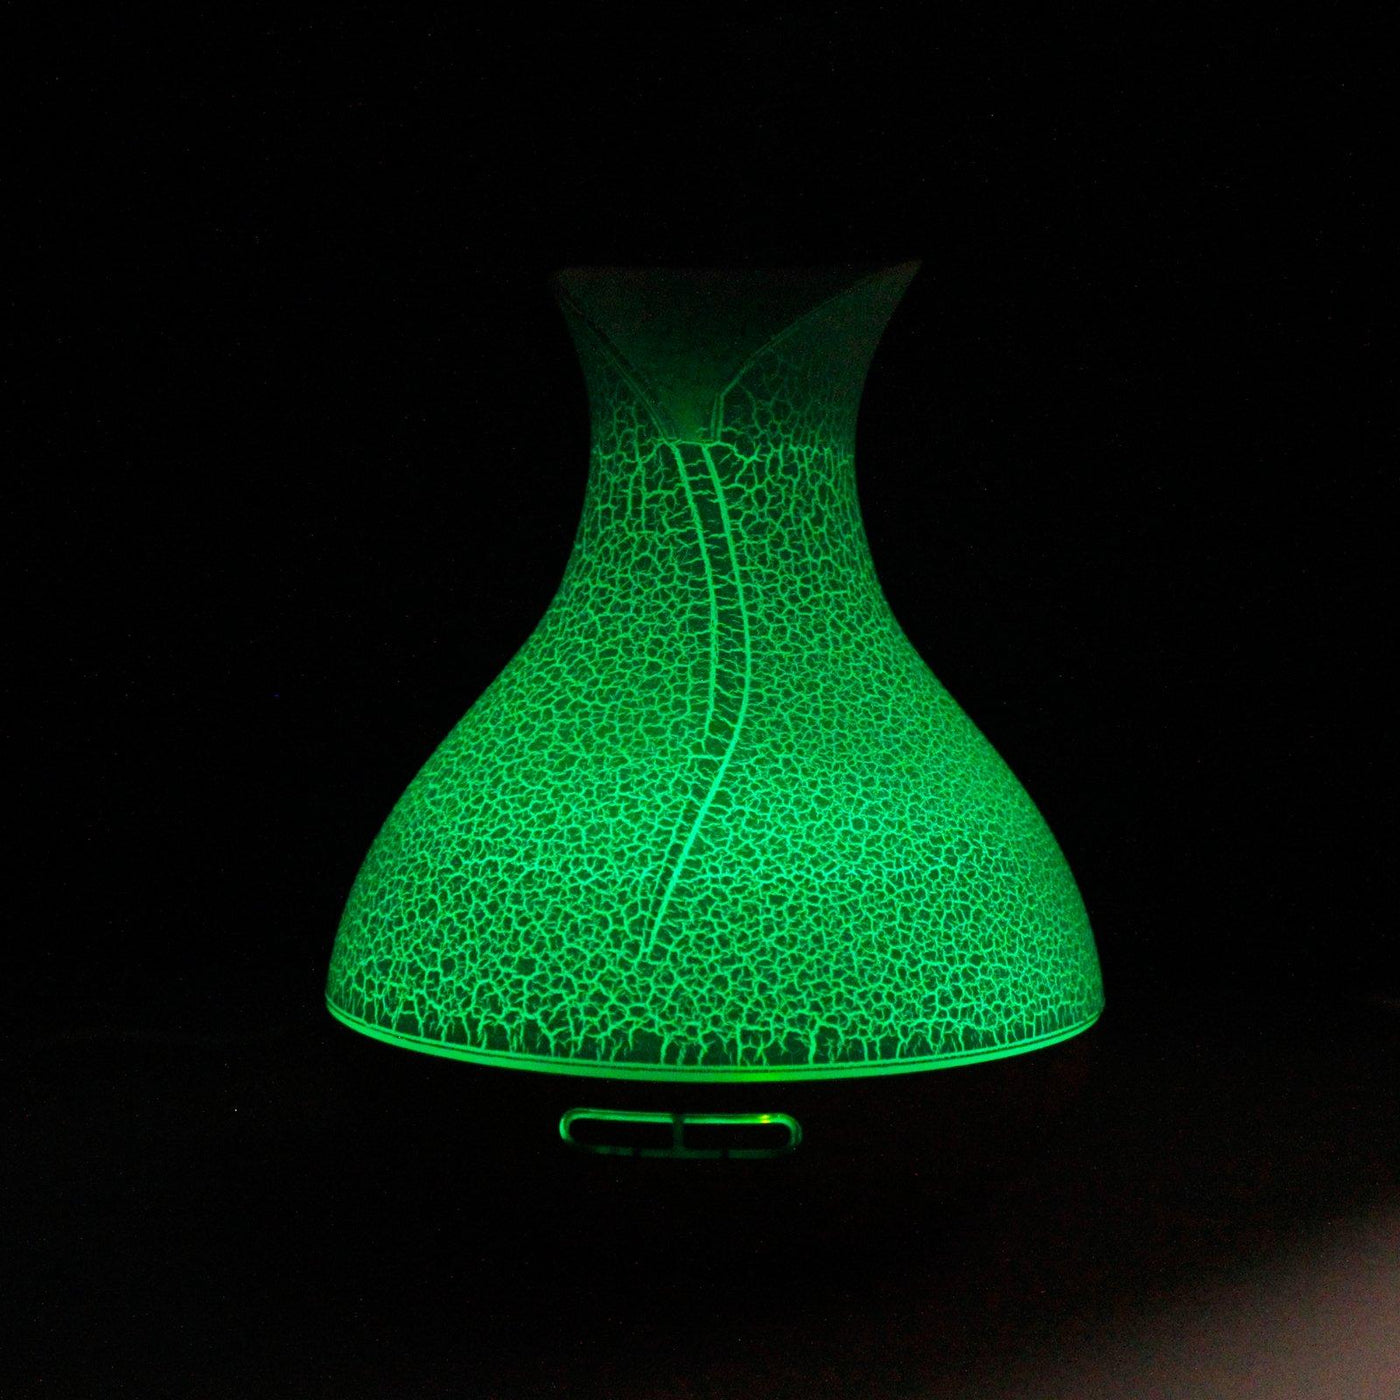 Palma Ultrasonic Shell Effect USB Colour Changing Aroma Diffuser With Timer.